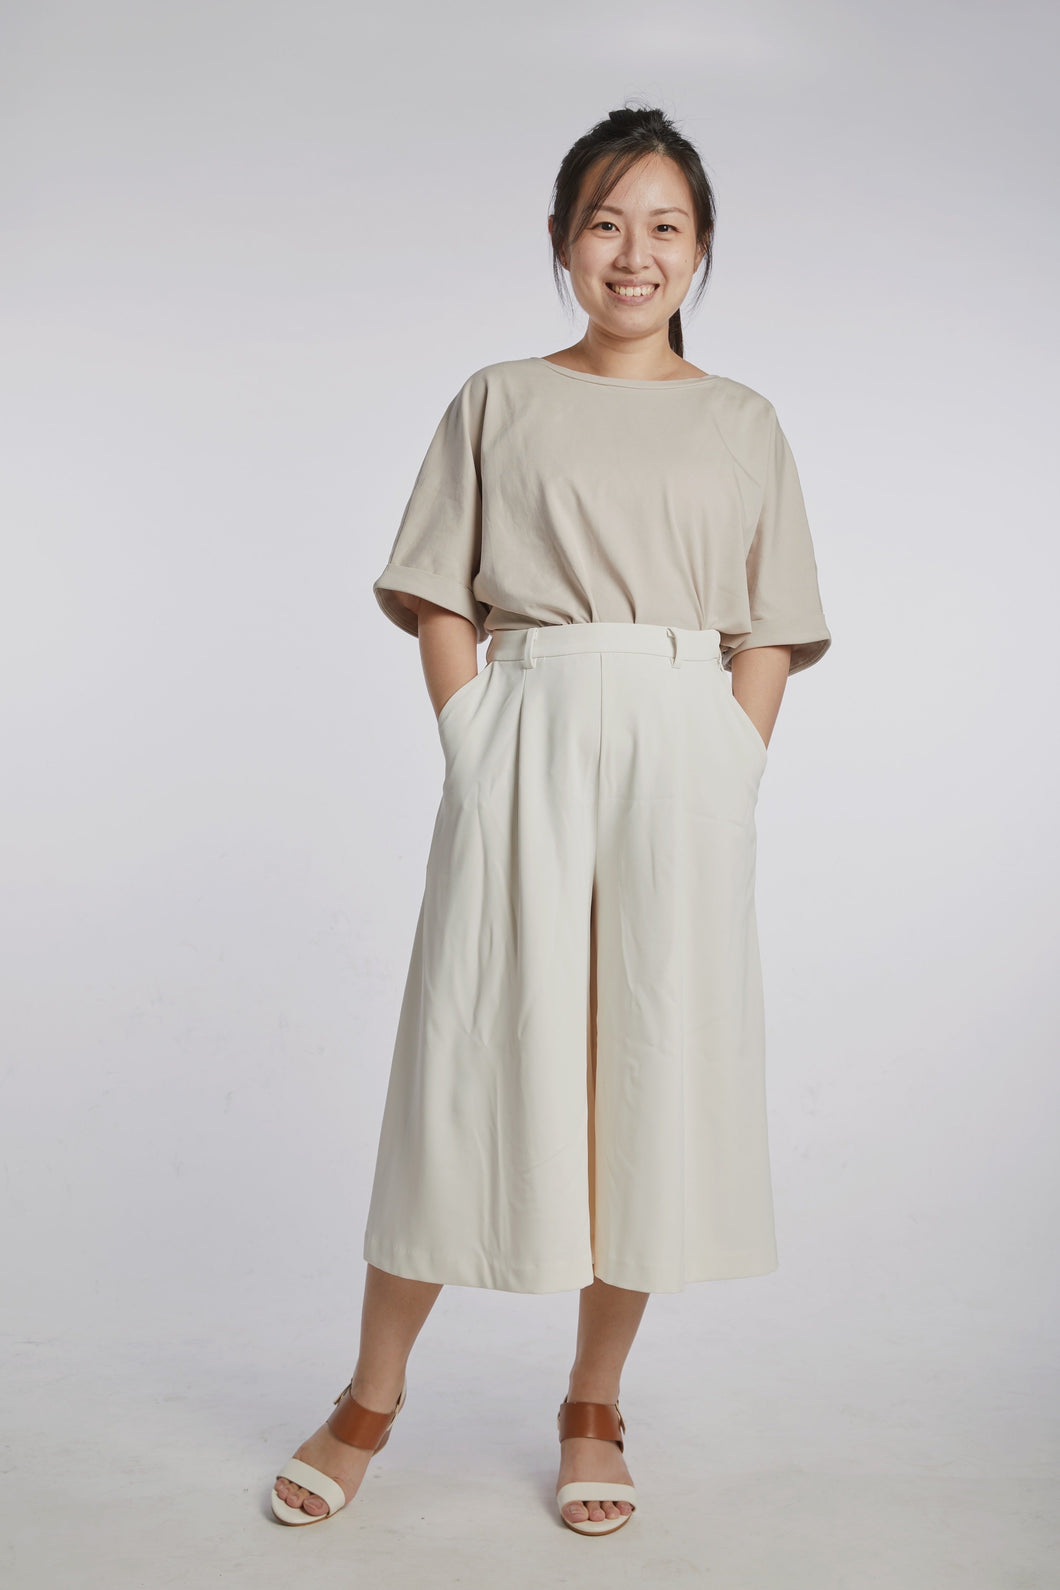 A Mighty Top (Latte Brown) - Size XL